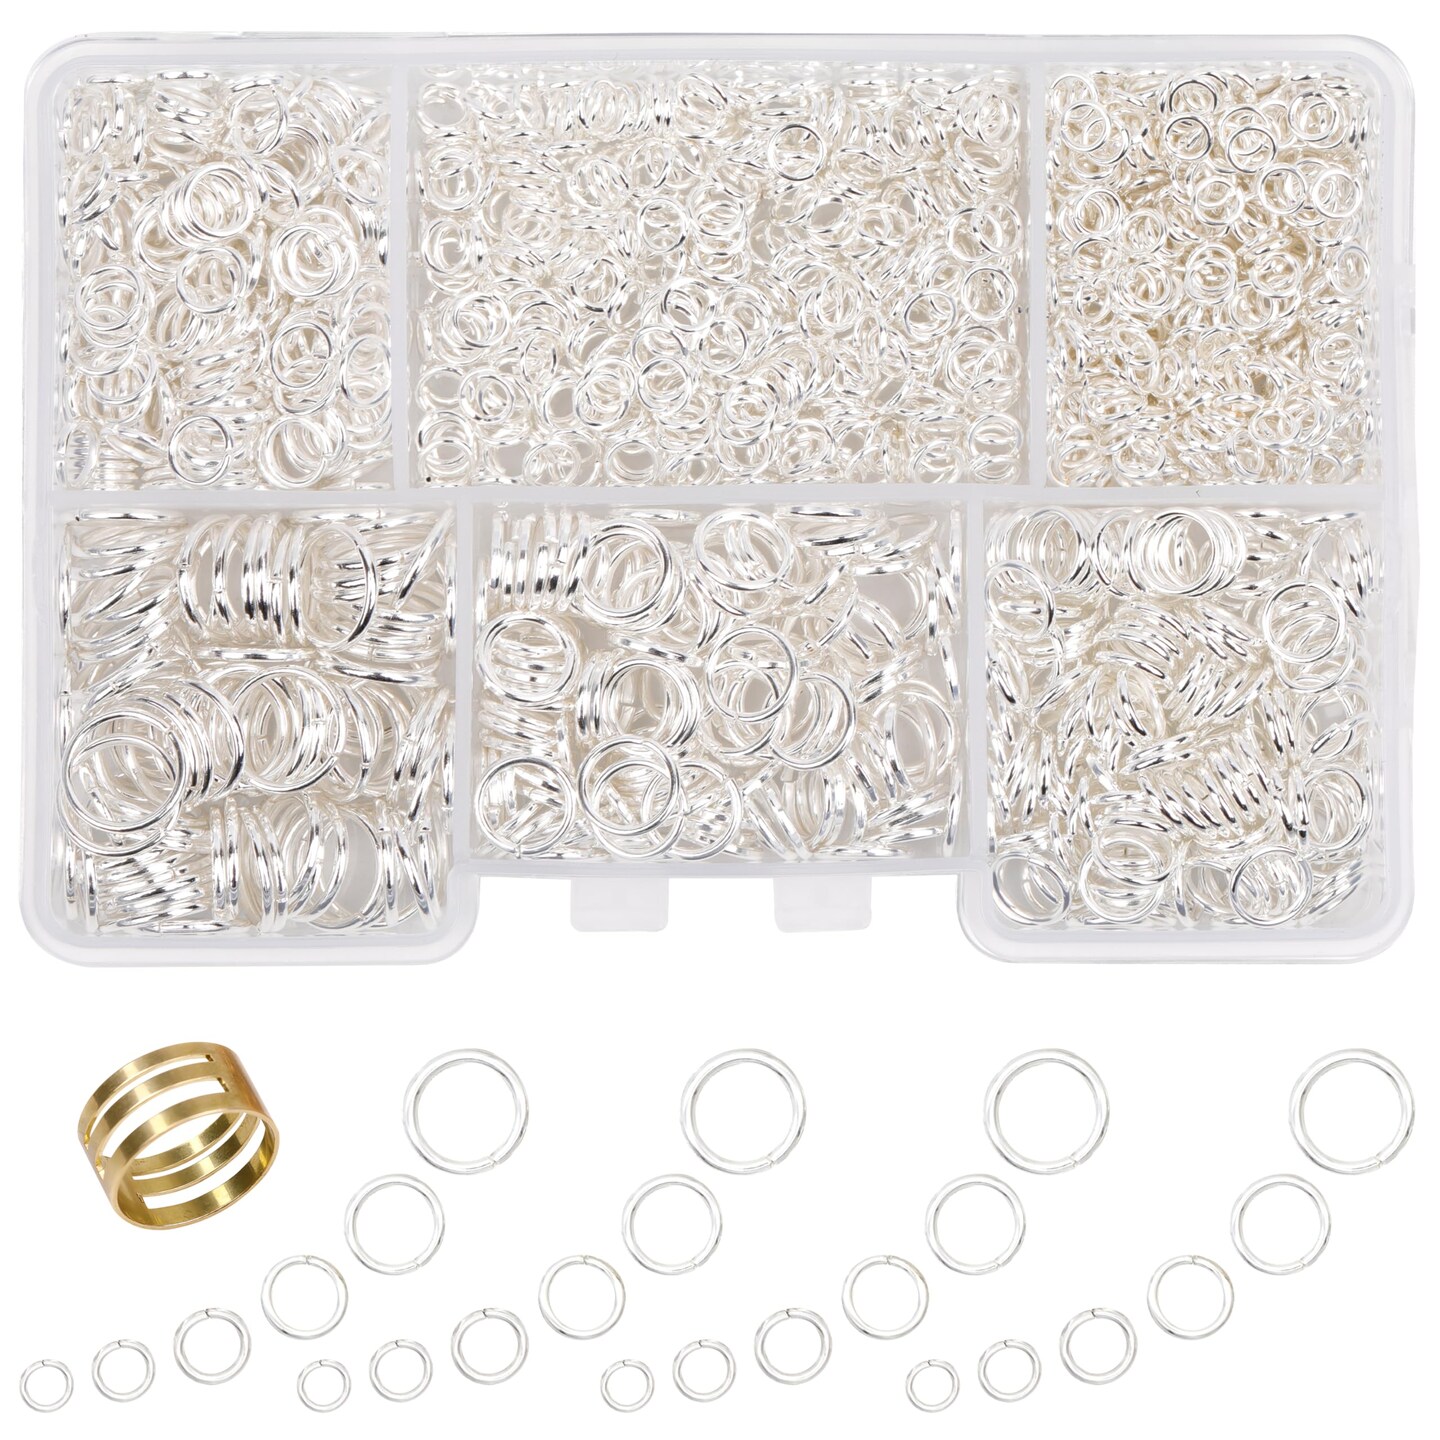 GMMA 1400 Pcs stainless steel jump rings for jewelry making 4mm 6mm 5mm 7mm 8mm 10mm necklace bracelet clasps jewelry making supplies for adults(Silver)